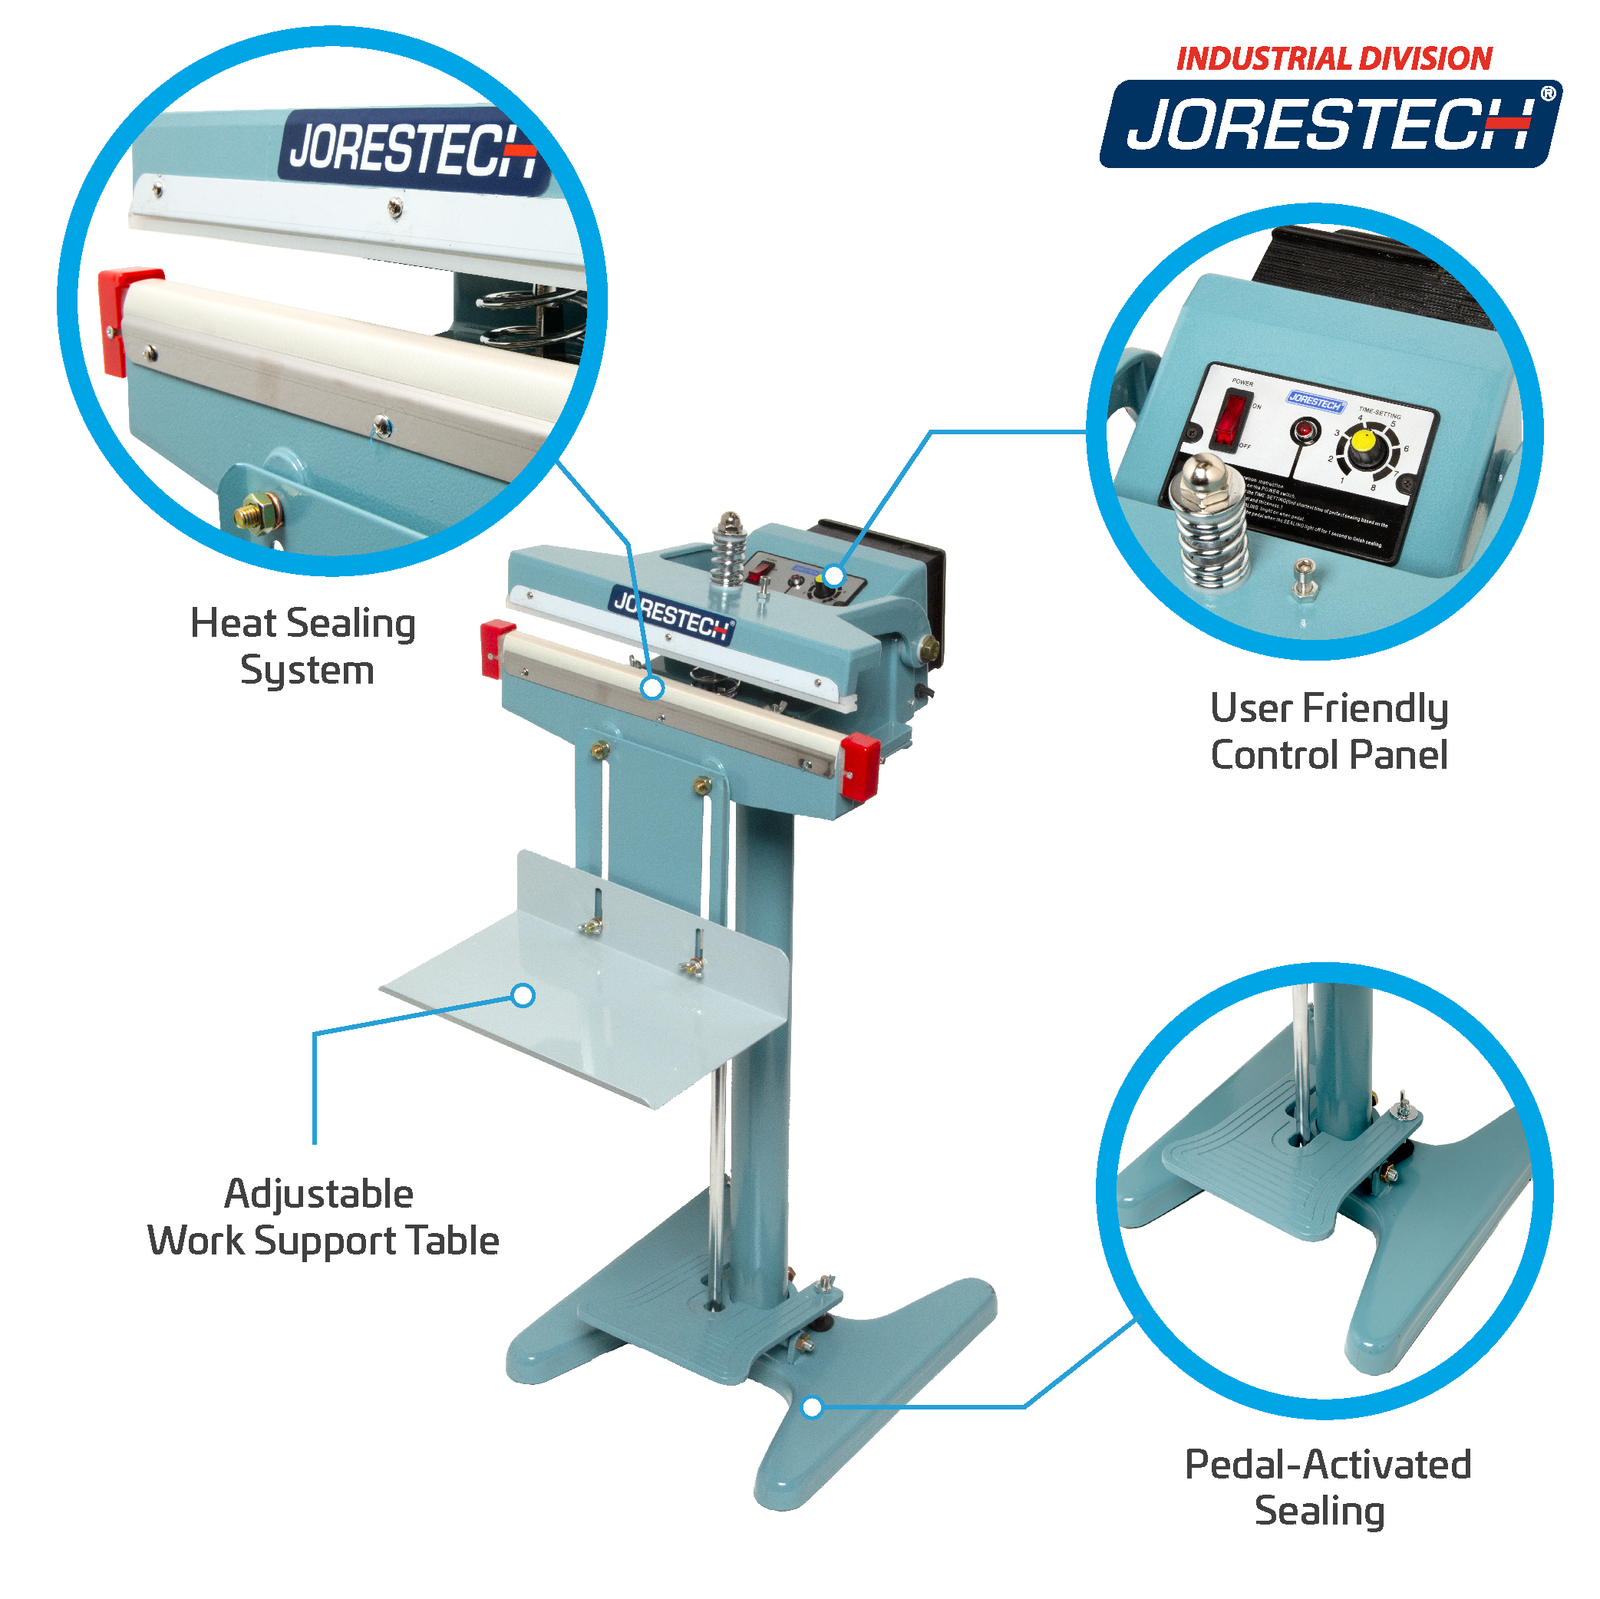 Infographic shows JORES TECHNOLOGIES® foot impulse bag sealer. Highlighted features include Heat Sealing System, User Friendly Control Panel, Pedal-Activated Sealing, and Adjustable Work Support Table. Close-ups of sealing element, foot pedal, and control panel.